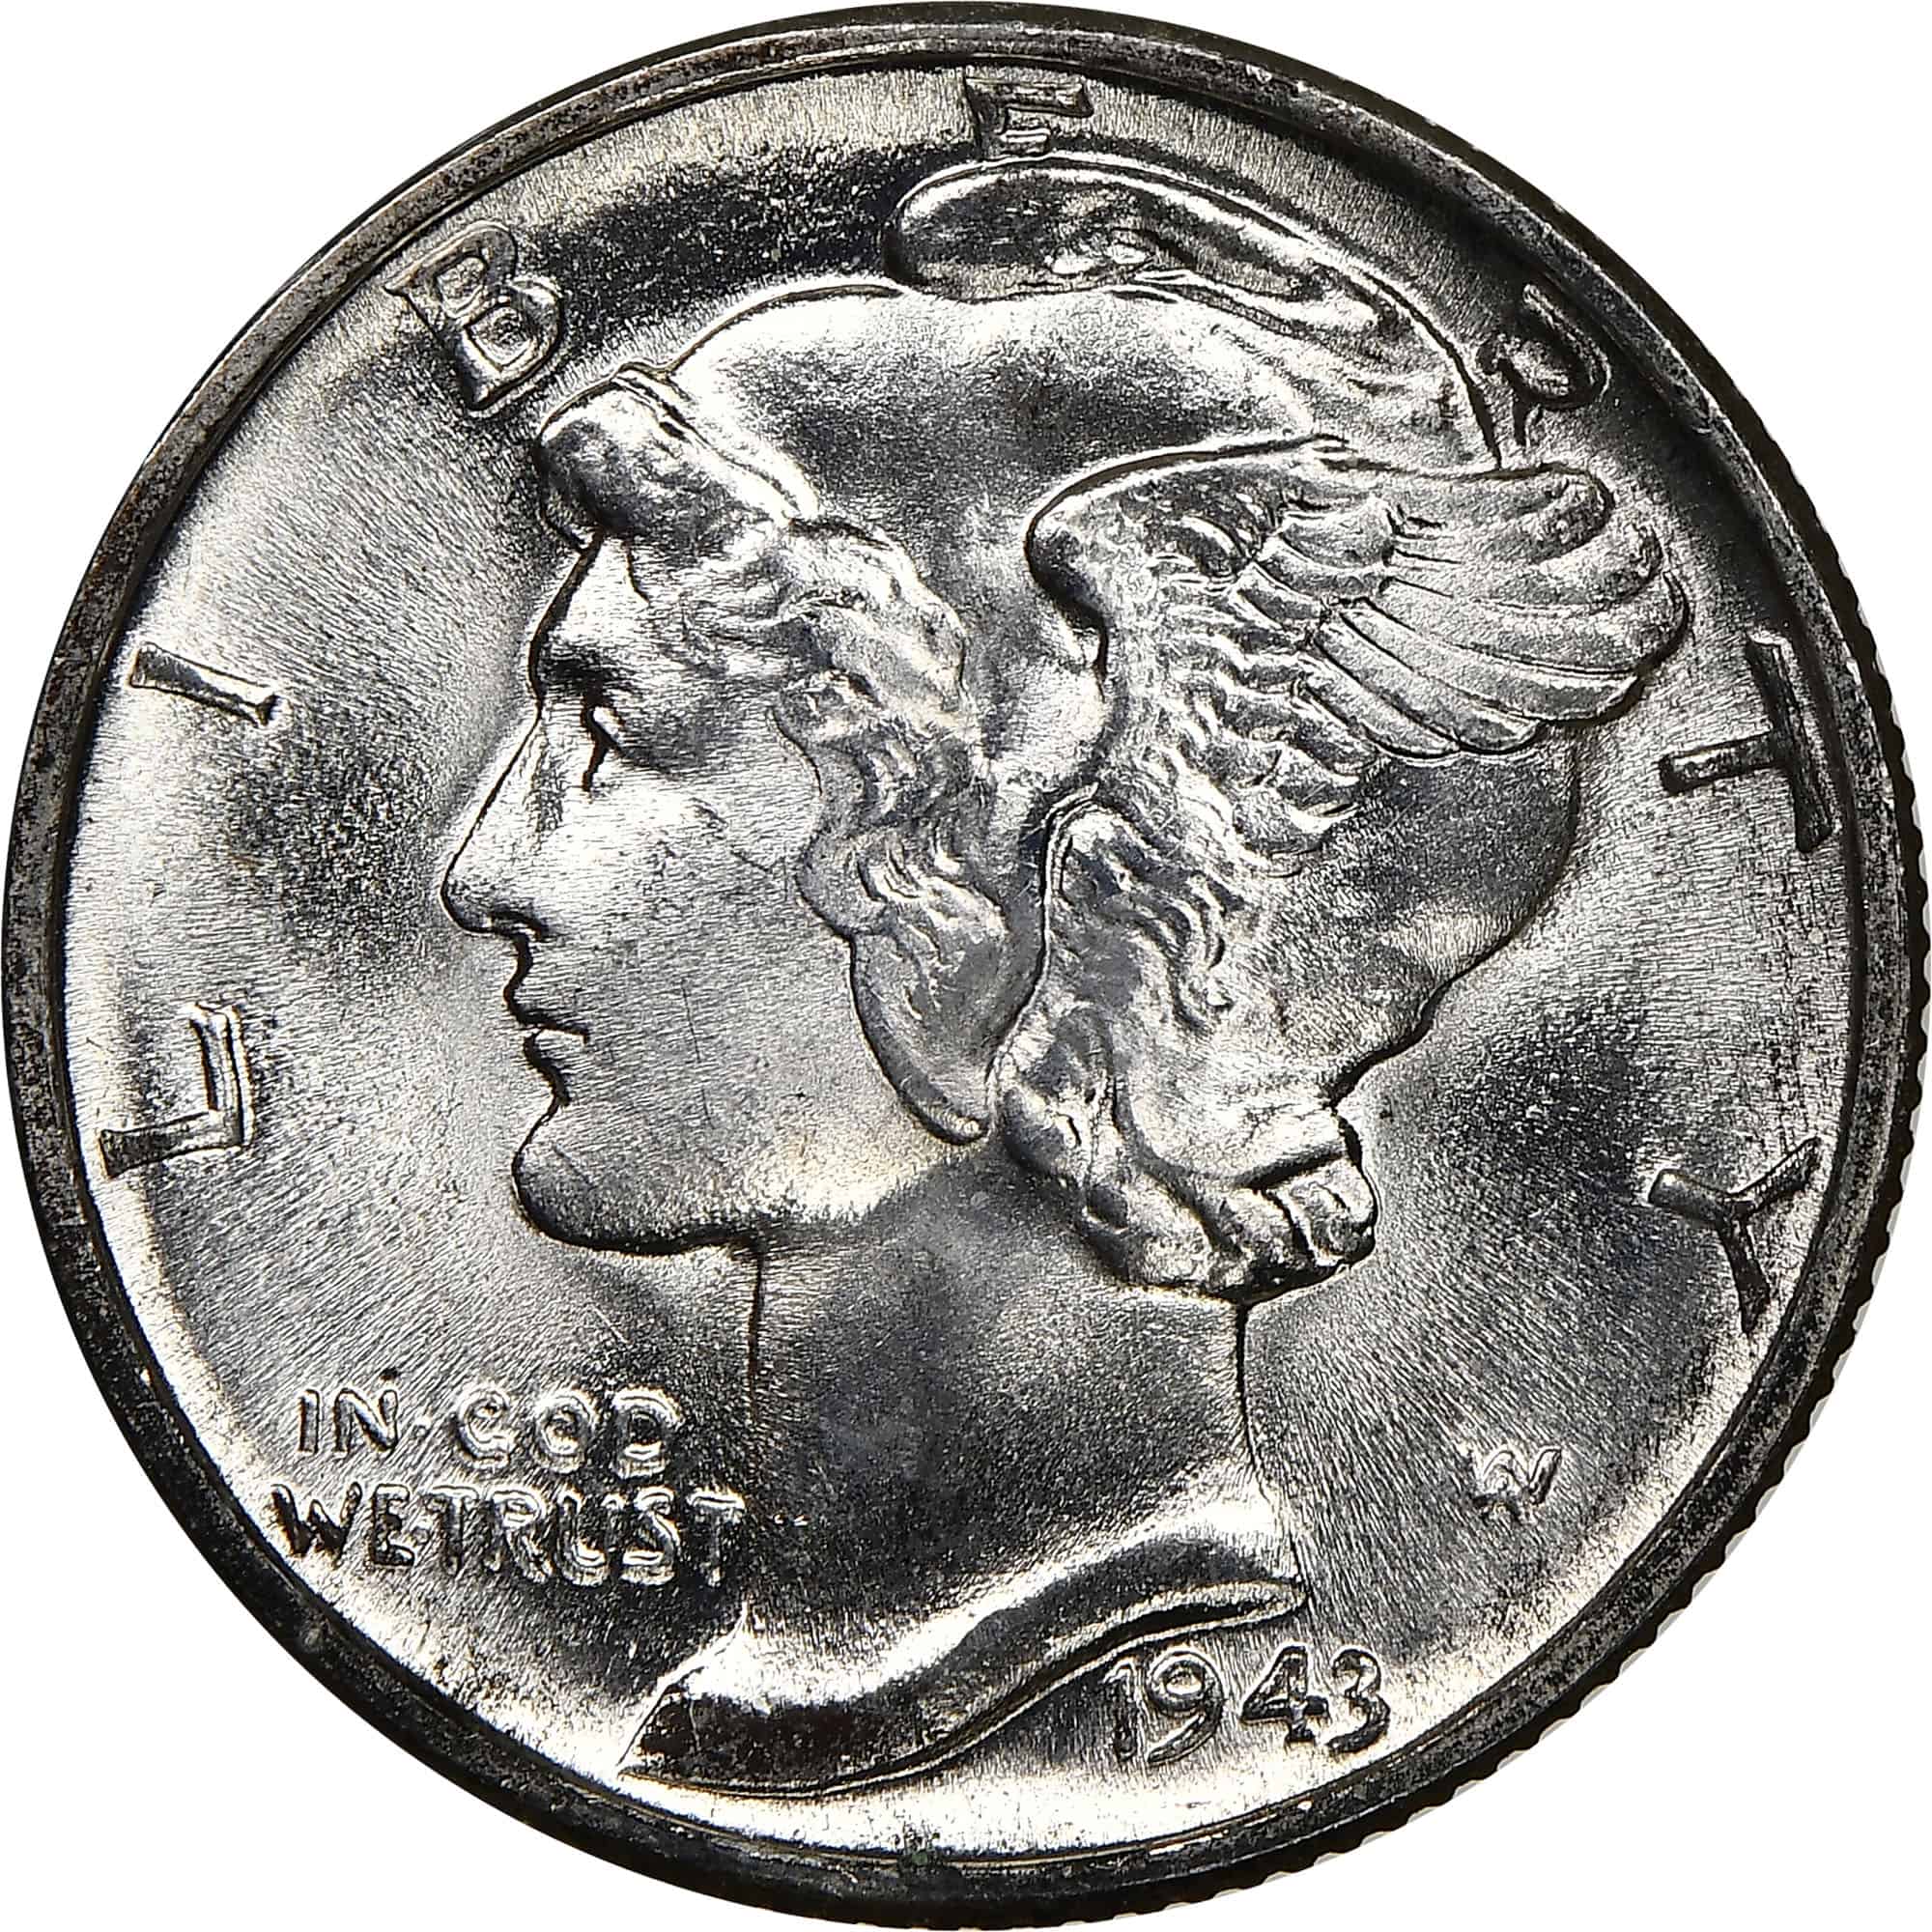 The obverse of the 1943 Mercury dime